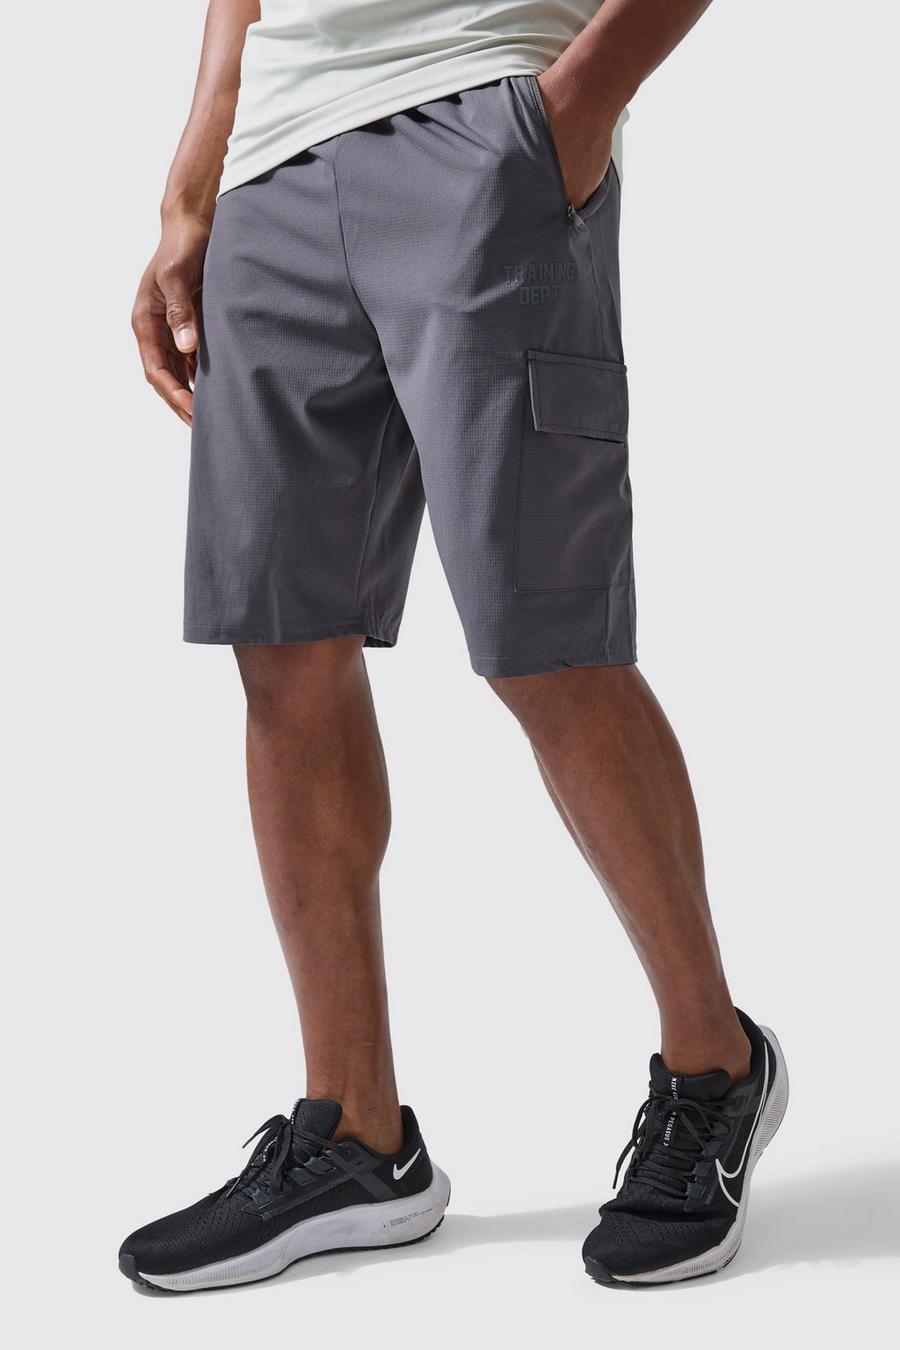 Charcoal Tall Active Training Dept Cargoshorts